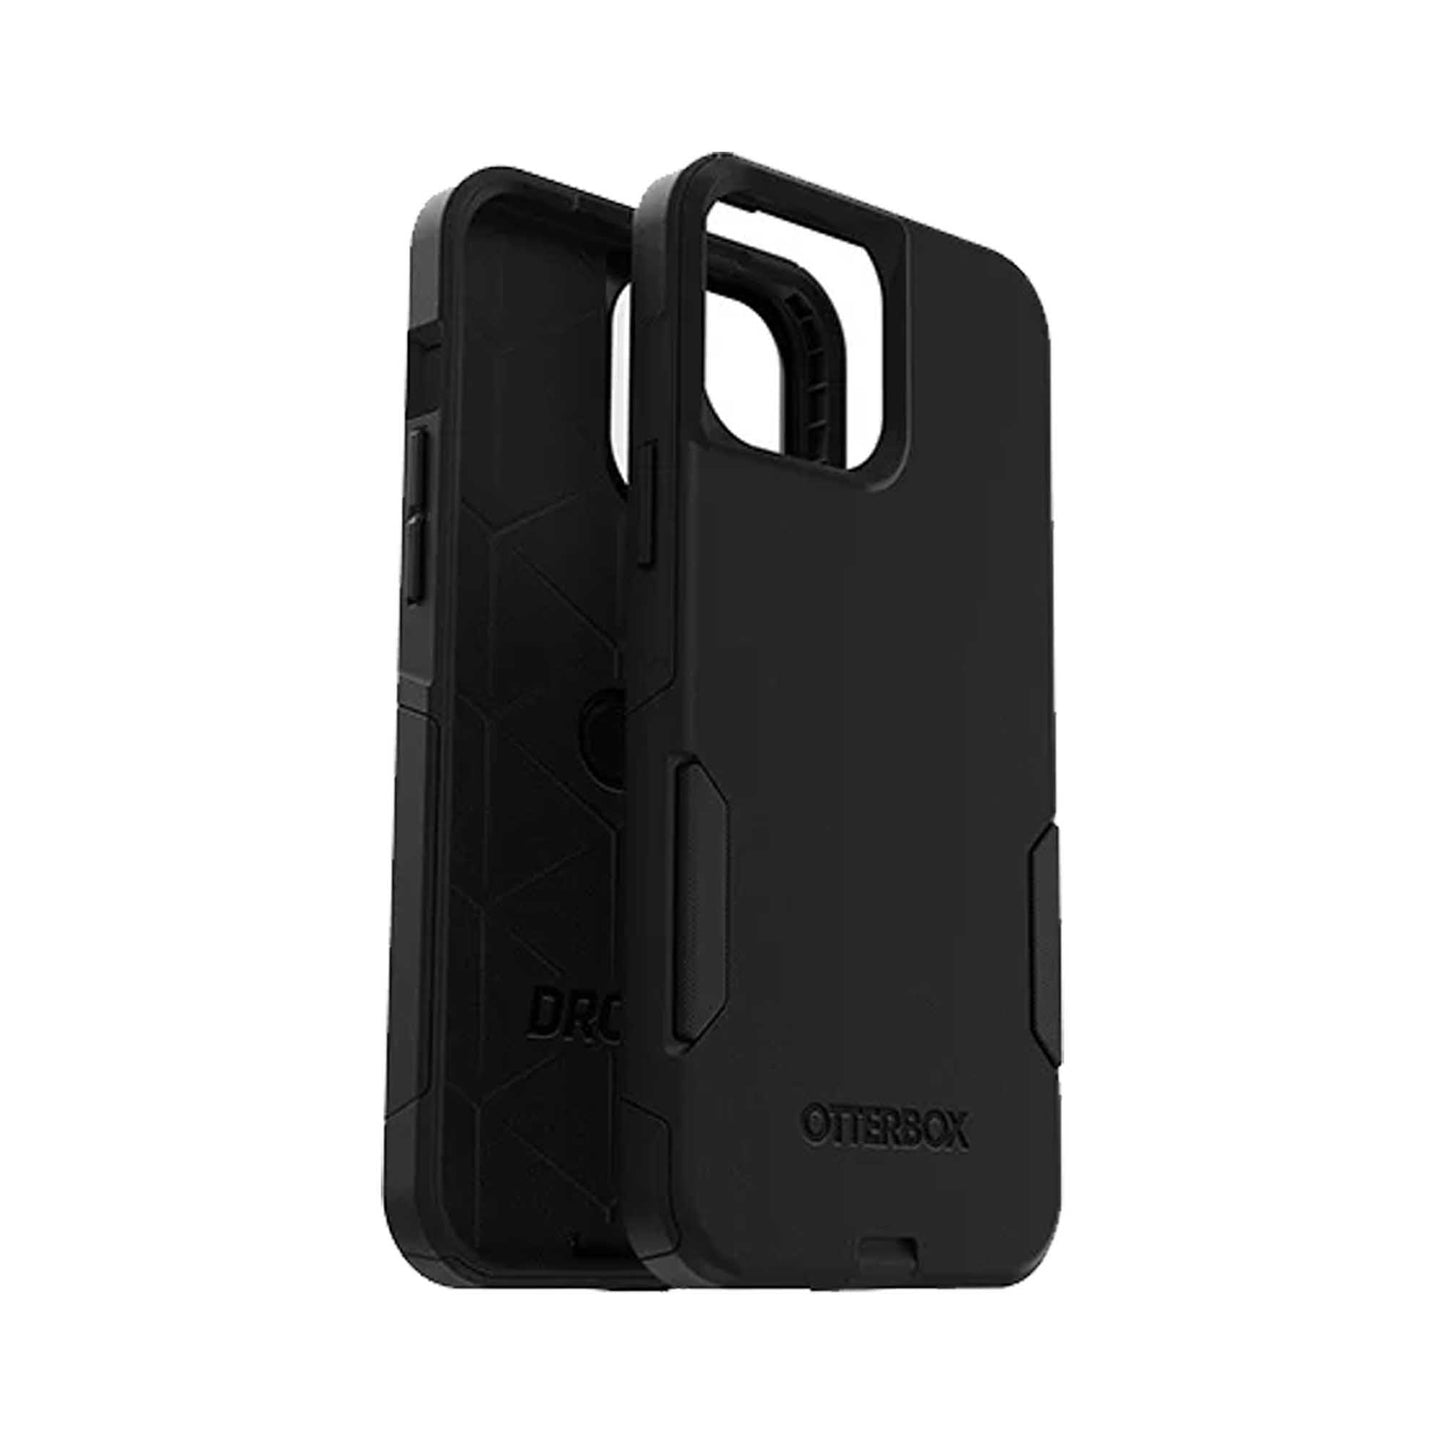 Otterbox Commuter for iPhone 13 Pro 6.1" 5G - Antimicrobial Case - Black (Barcode: 840104264683)